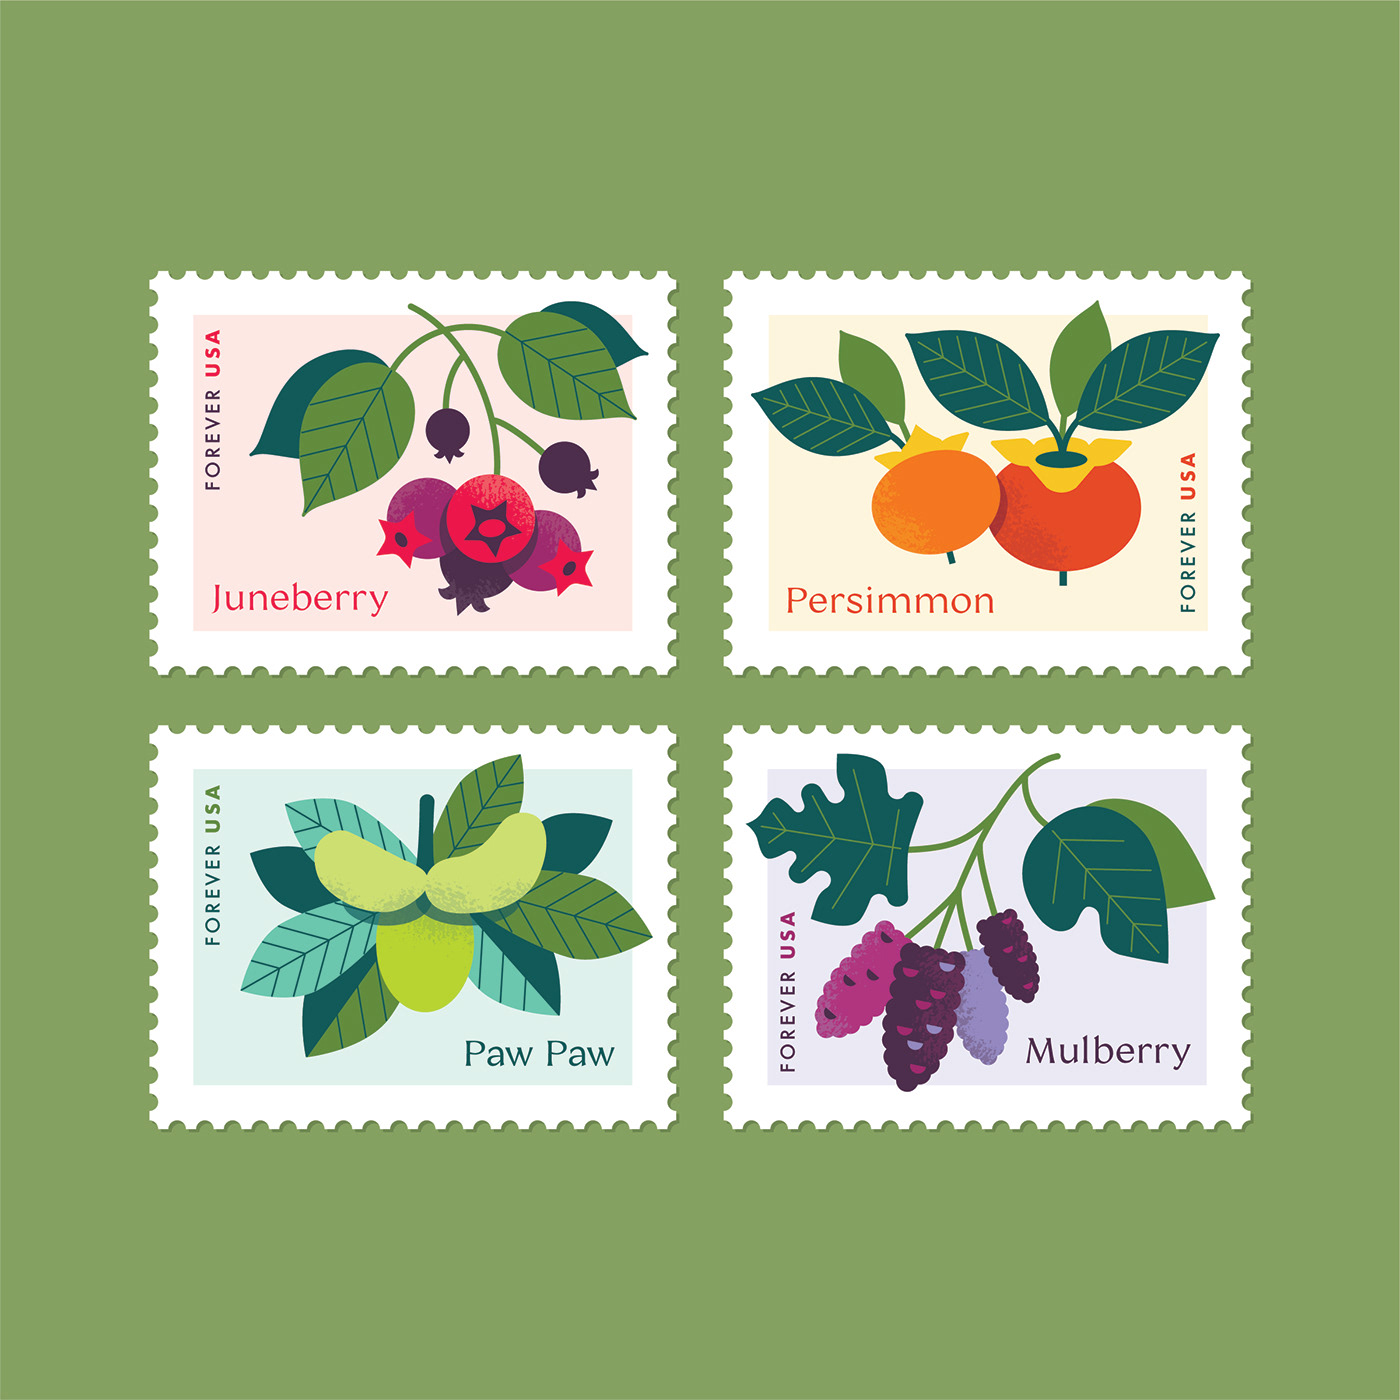 DigitalIllustration Fruit trees juneberry mulberry native trees pawpaws persimmons postage stamp Postage Stamp Design stamp